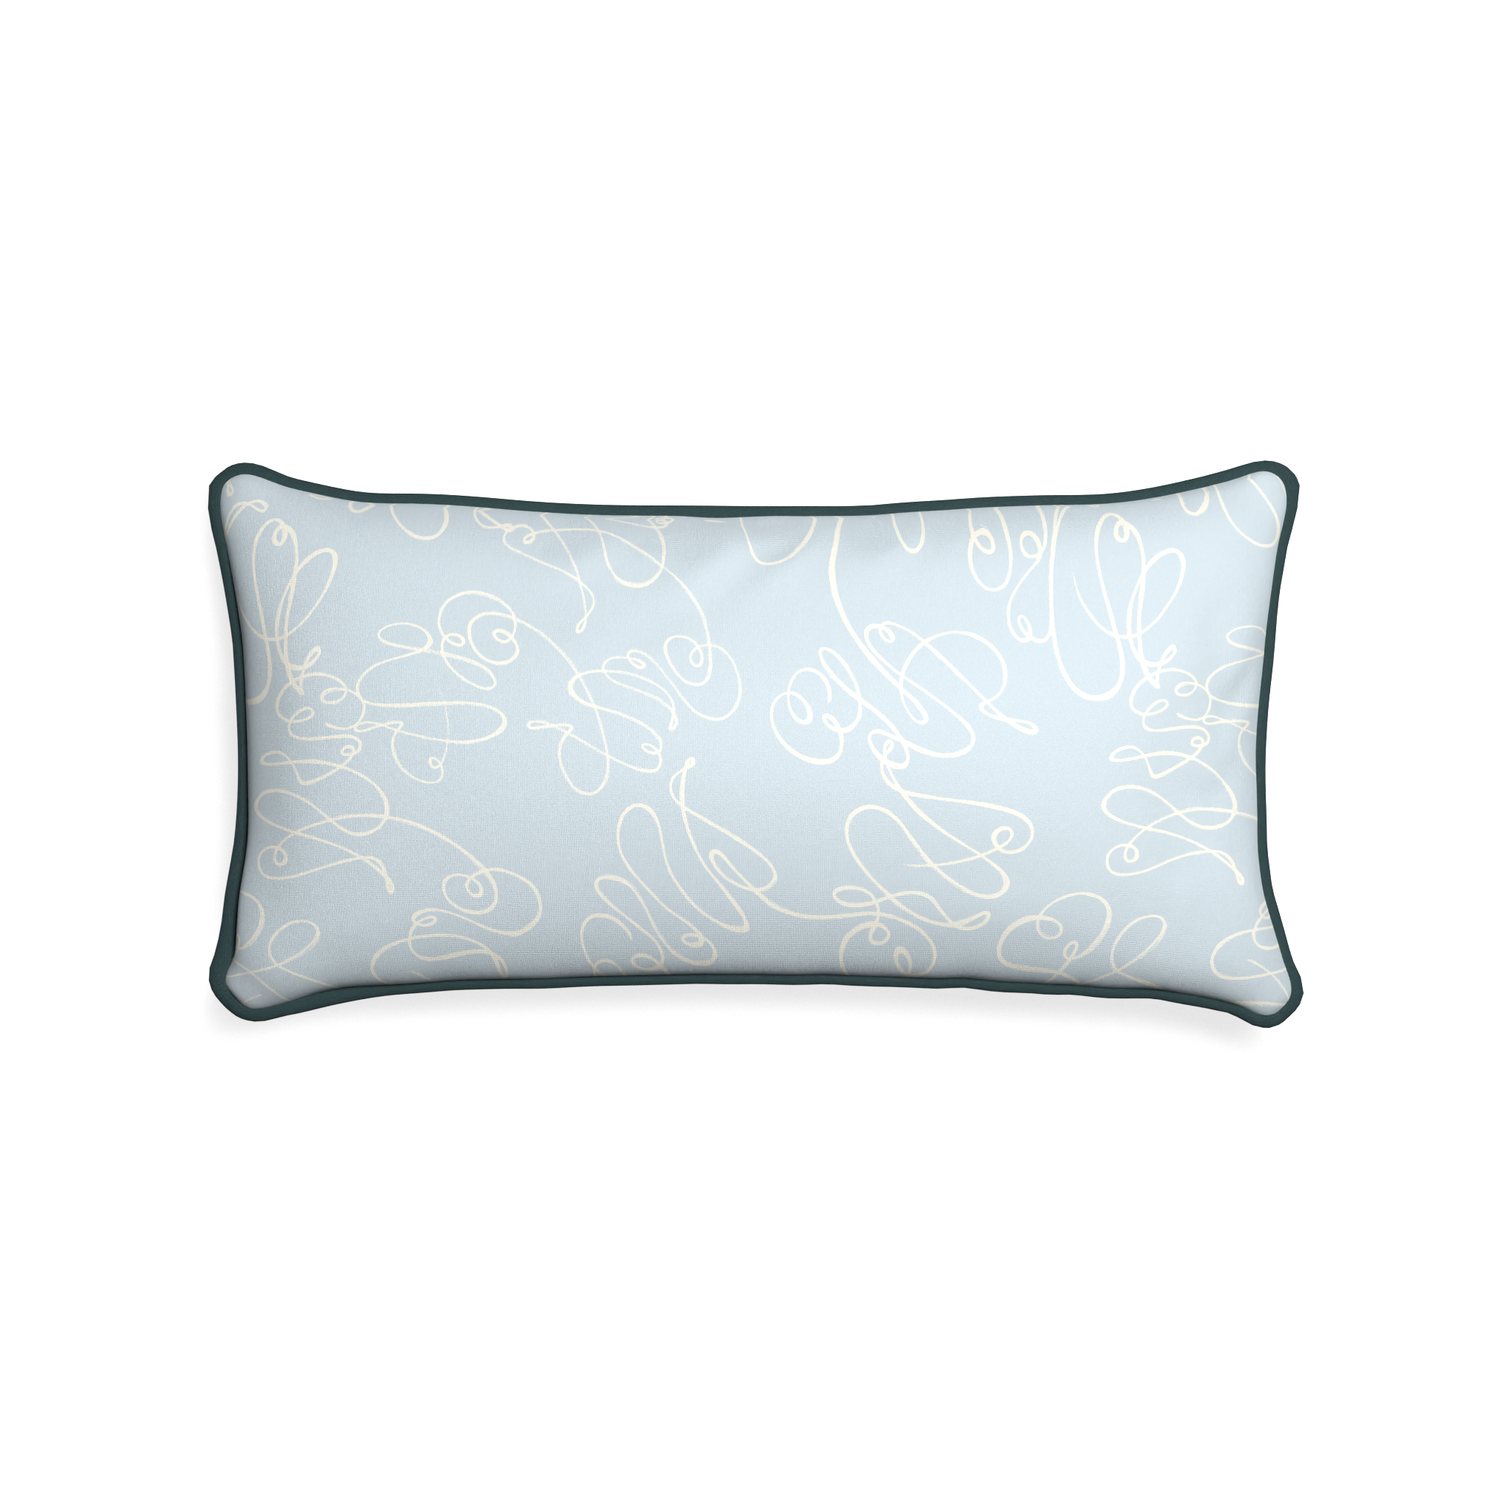 Midi-lumbar mirabella custom powder blue abstractpillow with p piping on white background